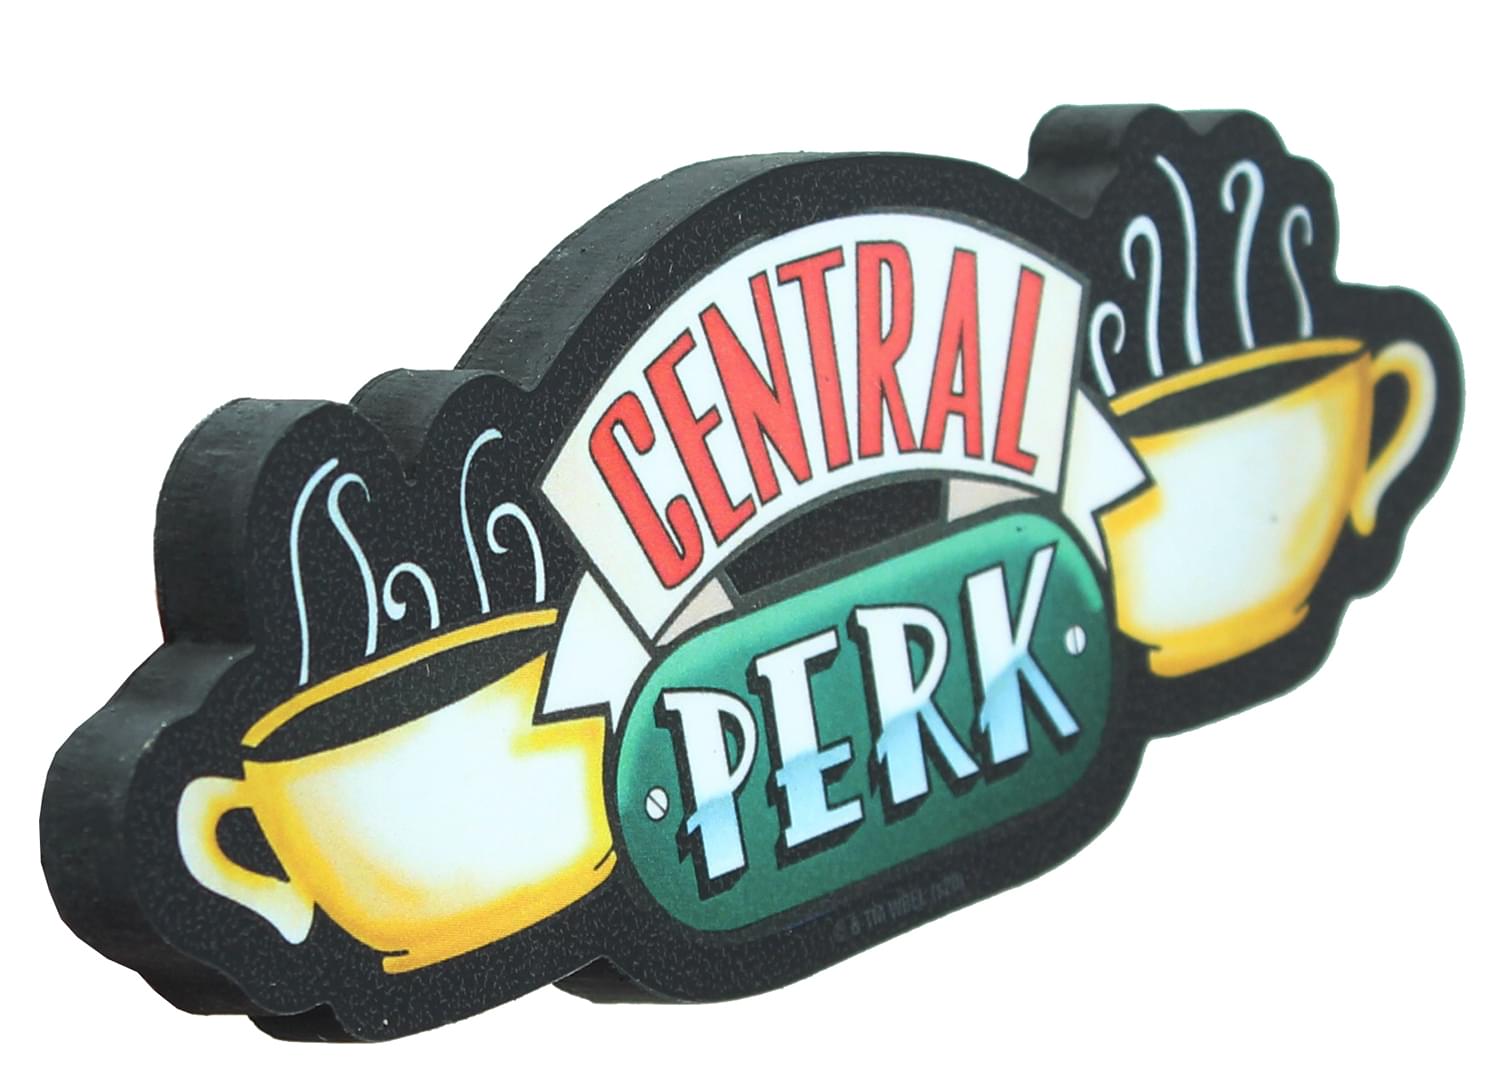 Friends Mood Magnet Friends Tv Show Gifts Central Perk 